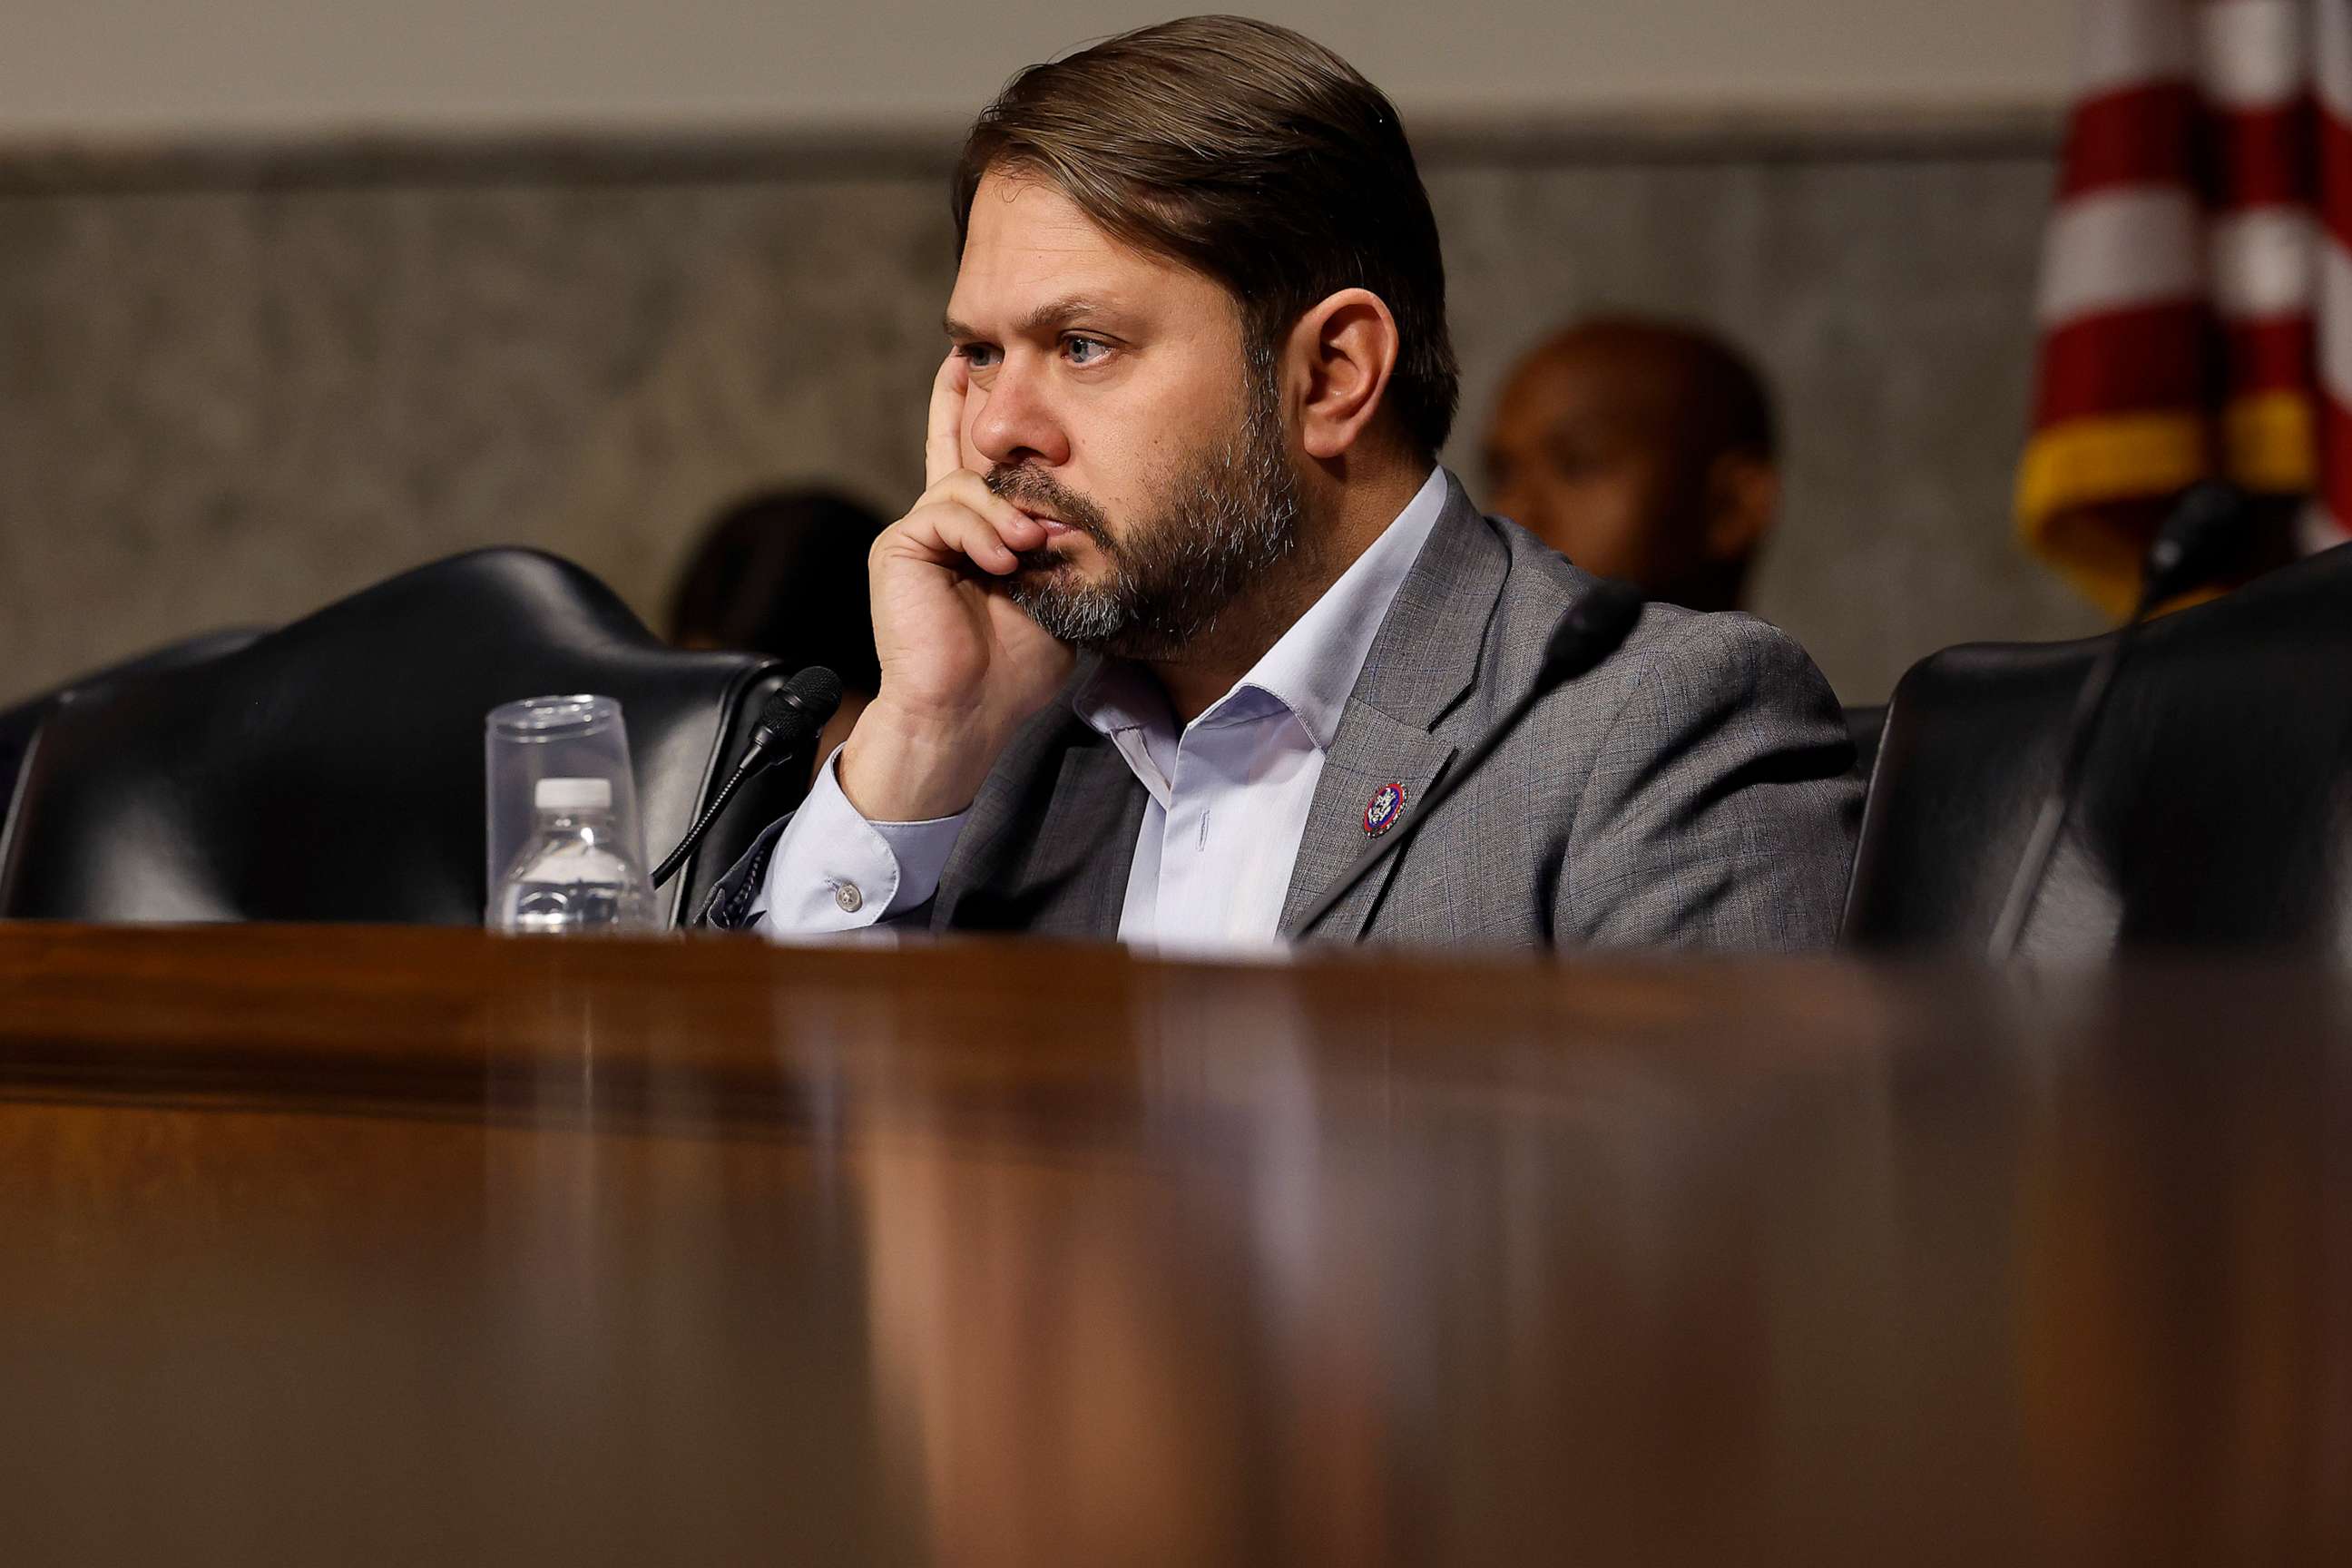 PHOTO: Helsinki Commission member Rep. Ruben Gallego listens to testimony on Capitol Hill on Dec. 13, 2022 in Washington, D.C.